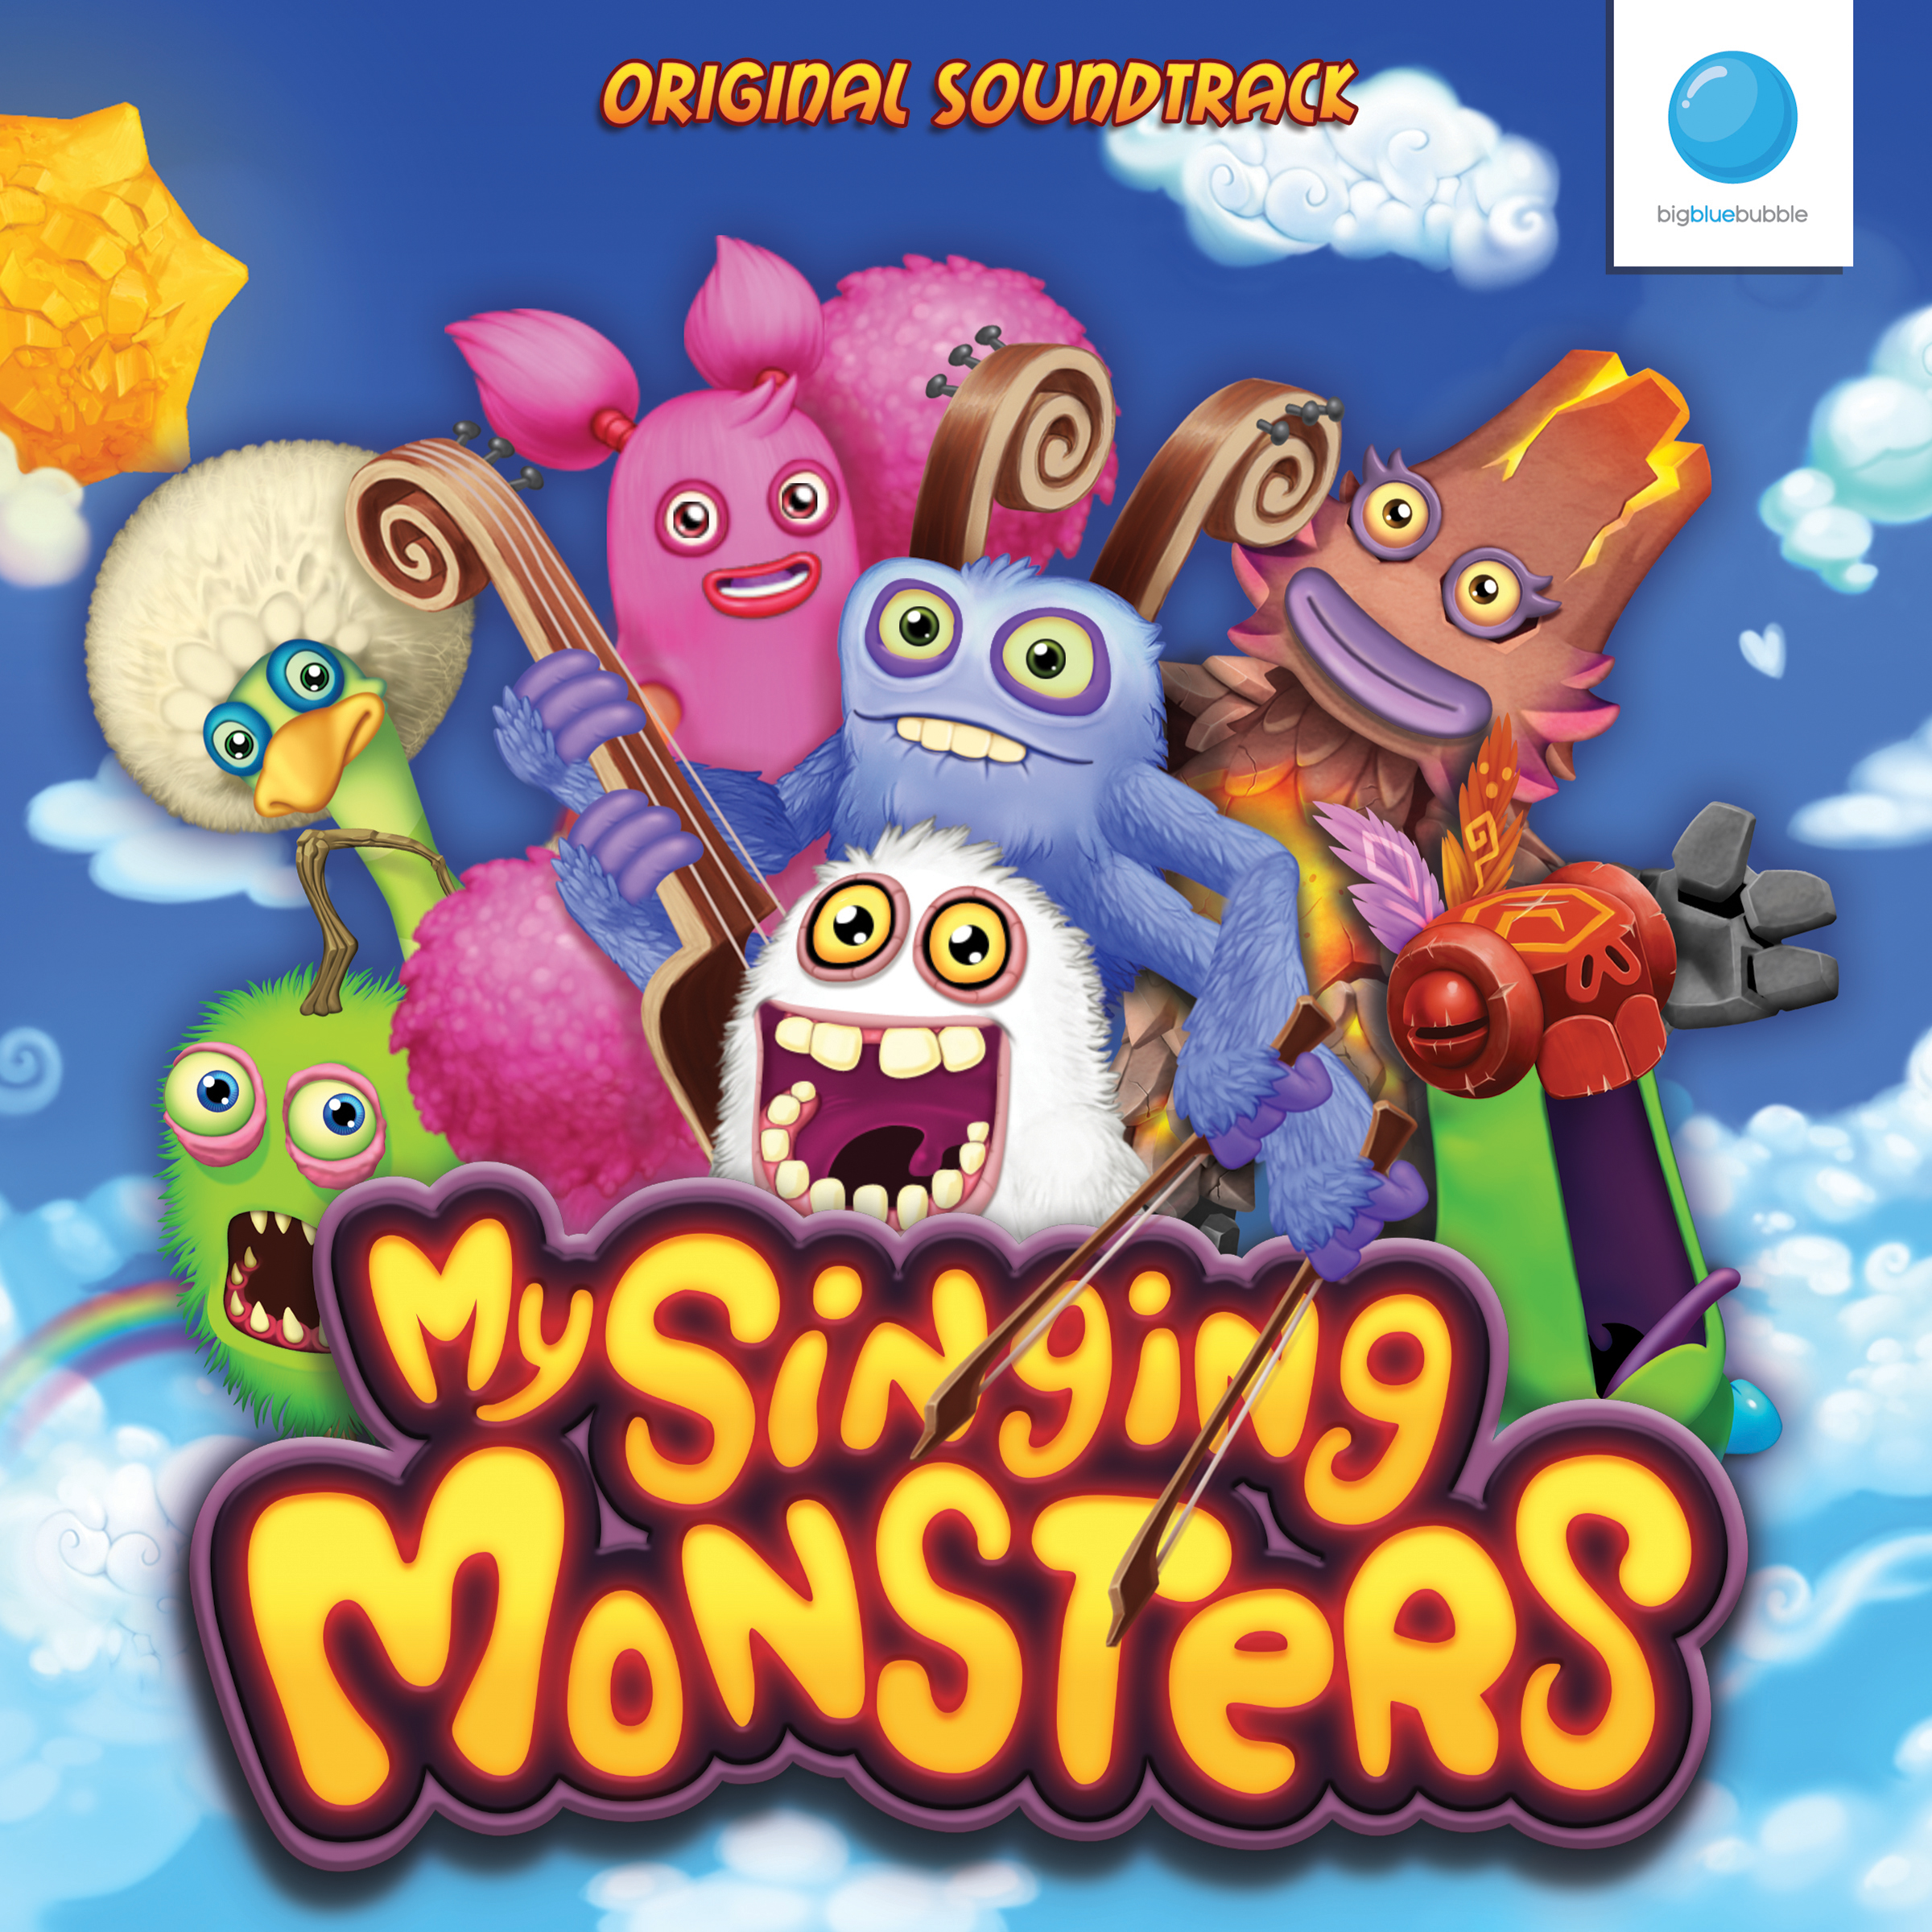 Louder Epic Wubbox] Cold Island - My Singing Monsters 